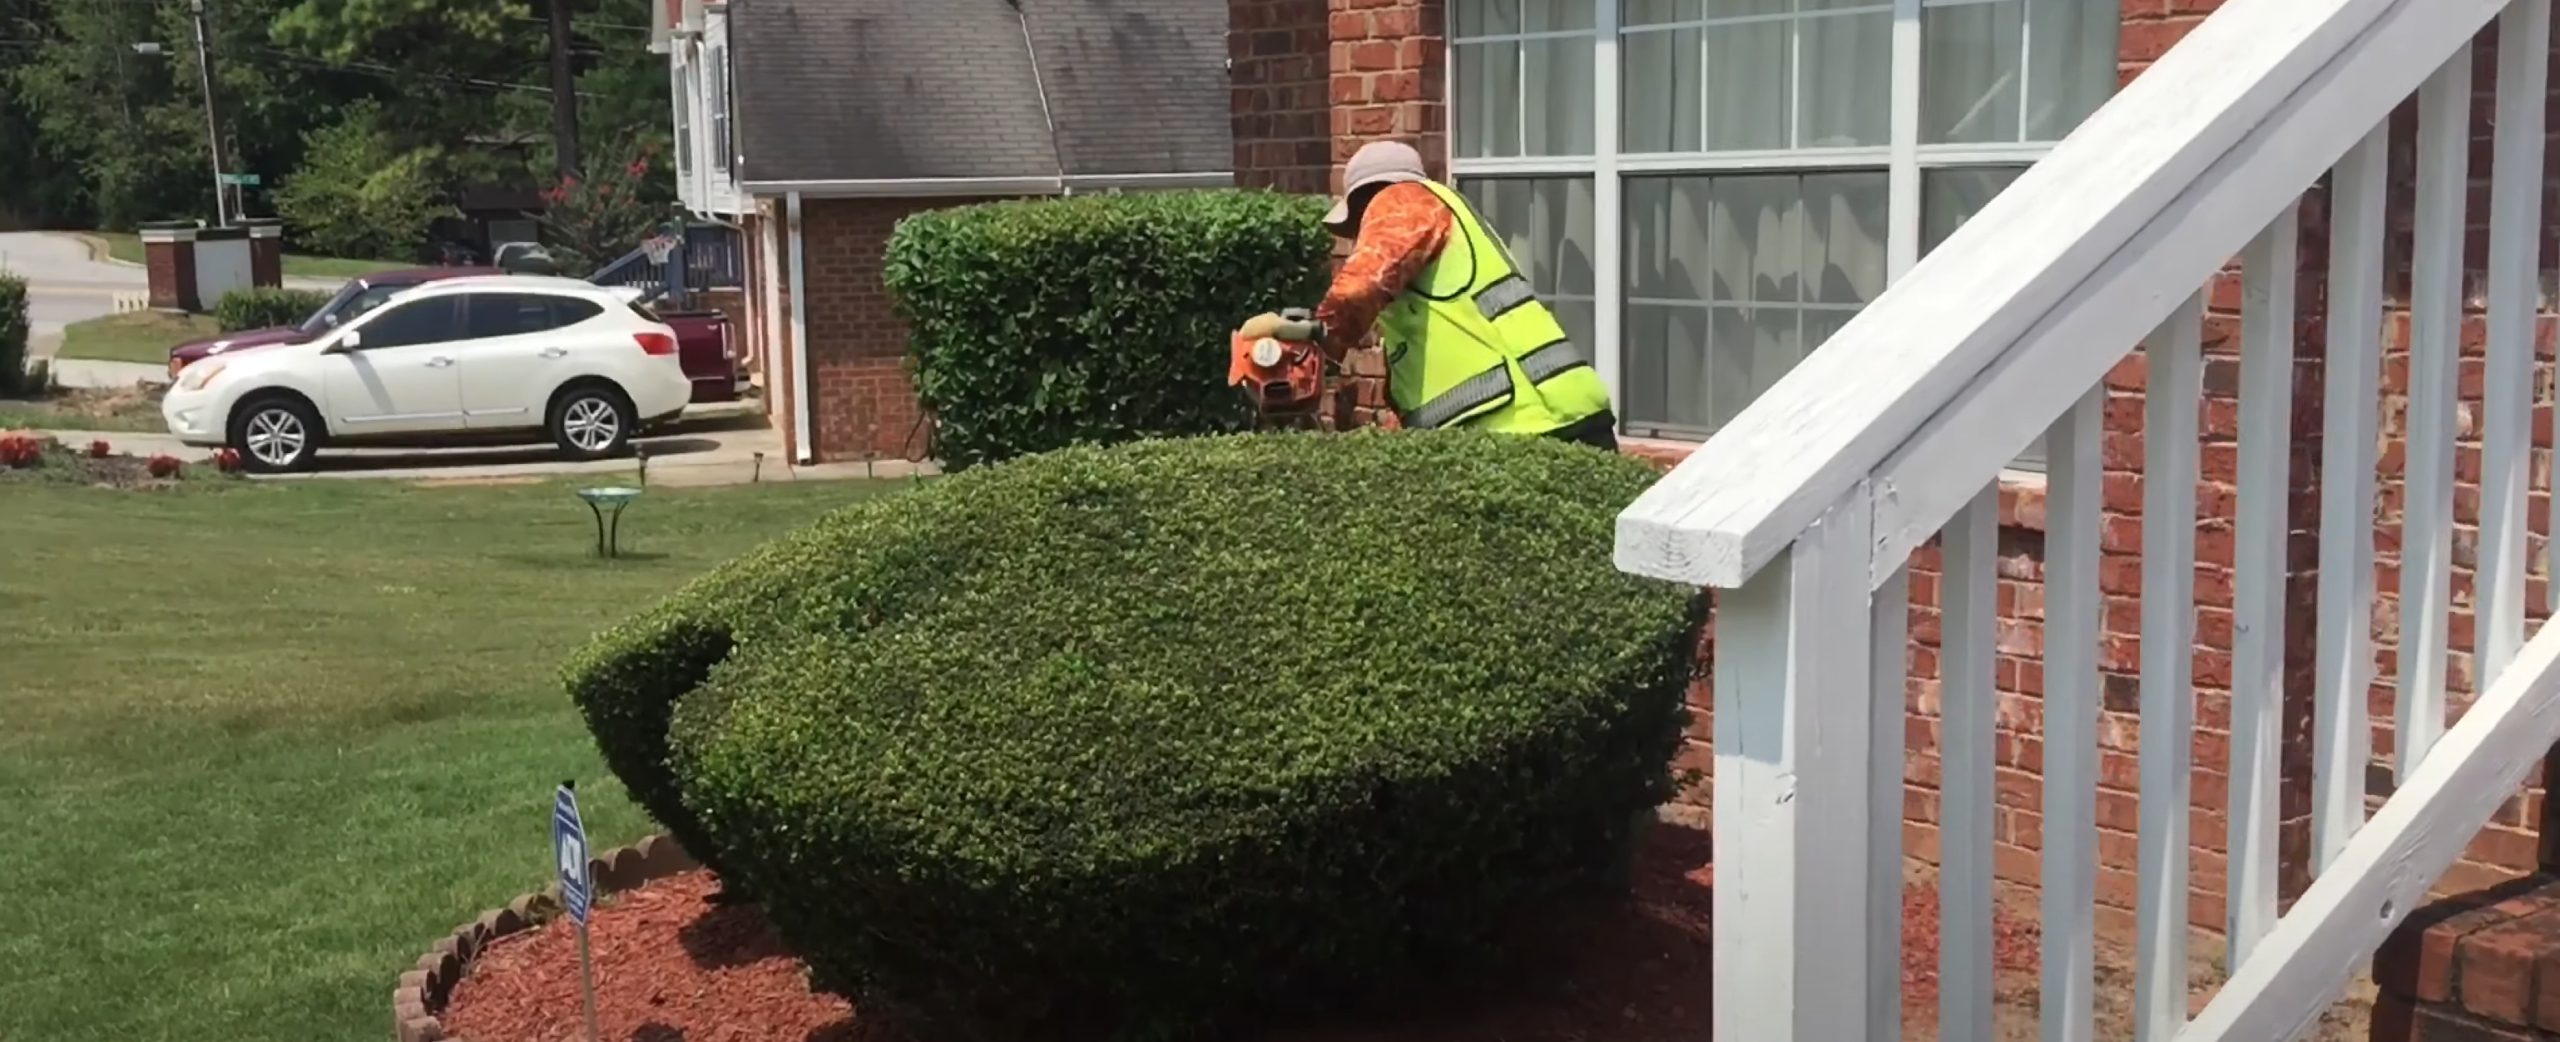 Hedge Trimming Stump Grinding